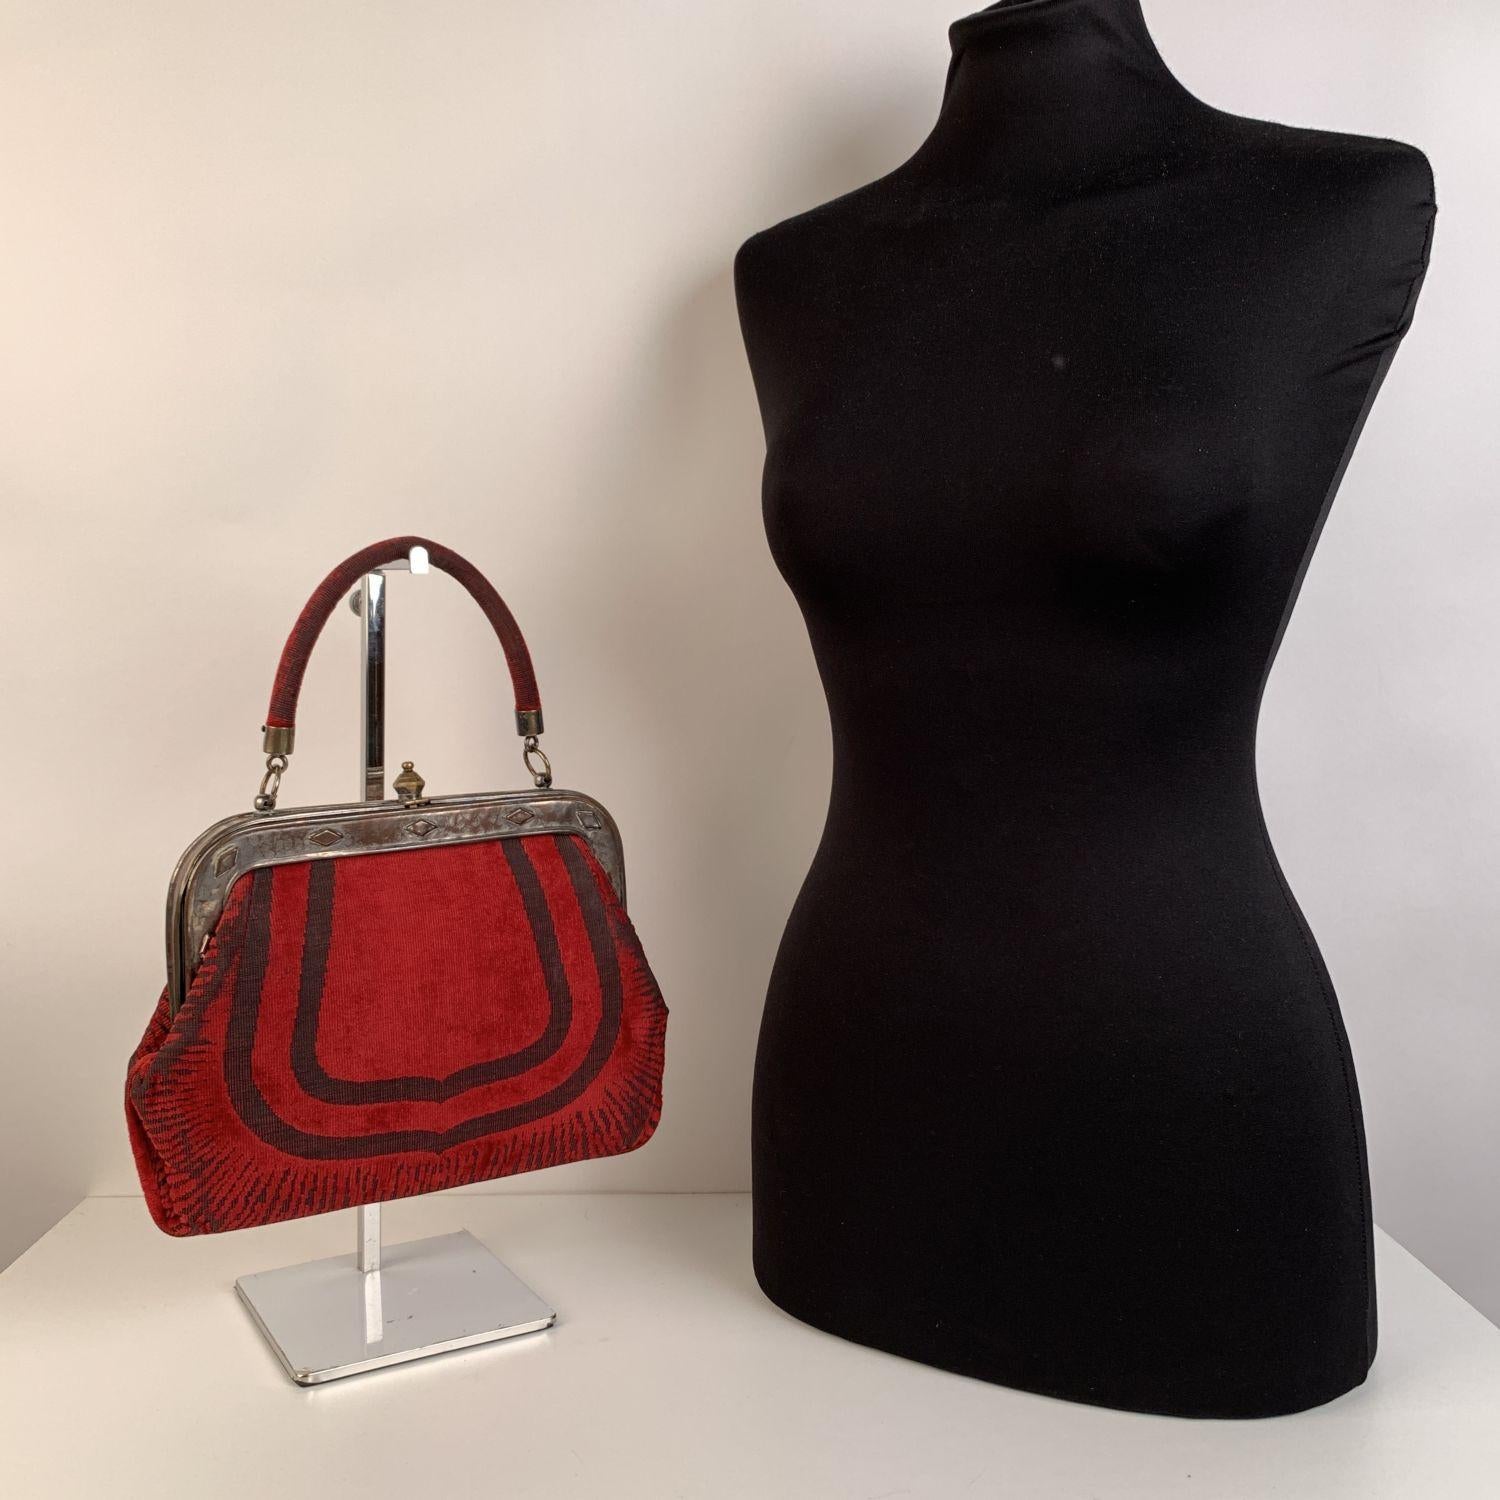 ROBERTA DI CAMERINO velvet handbag. Classic style in red cut out velvet. Metal frame. It features a leather top handle and a clasp closure on top. .Leather lining. 2 side open pockets and 1 side zip pocket inside. 